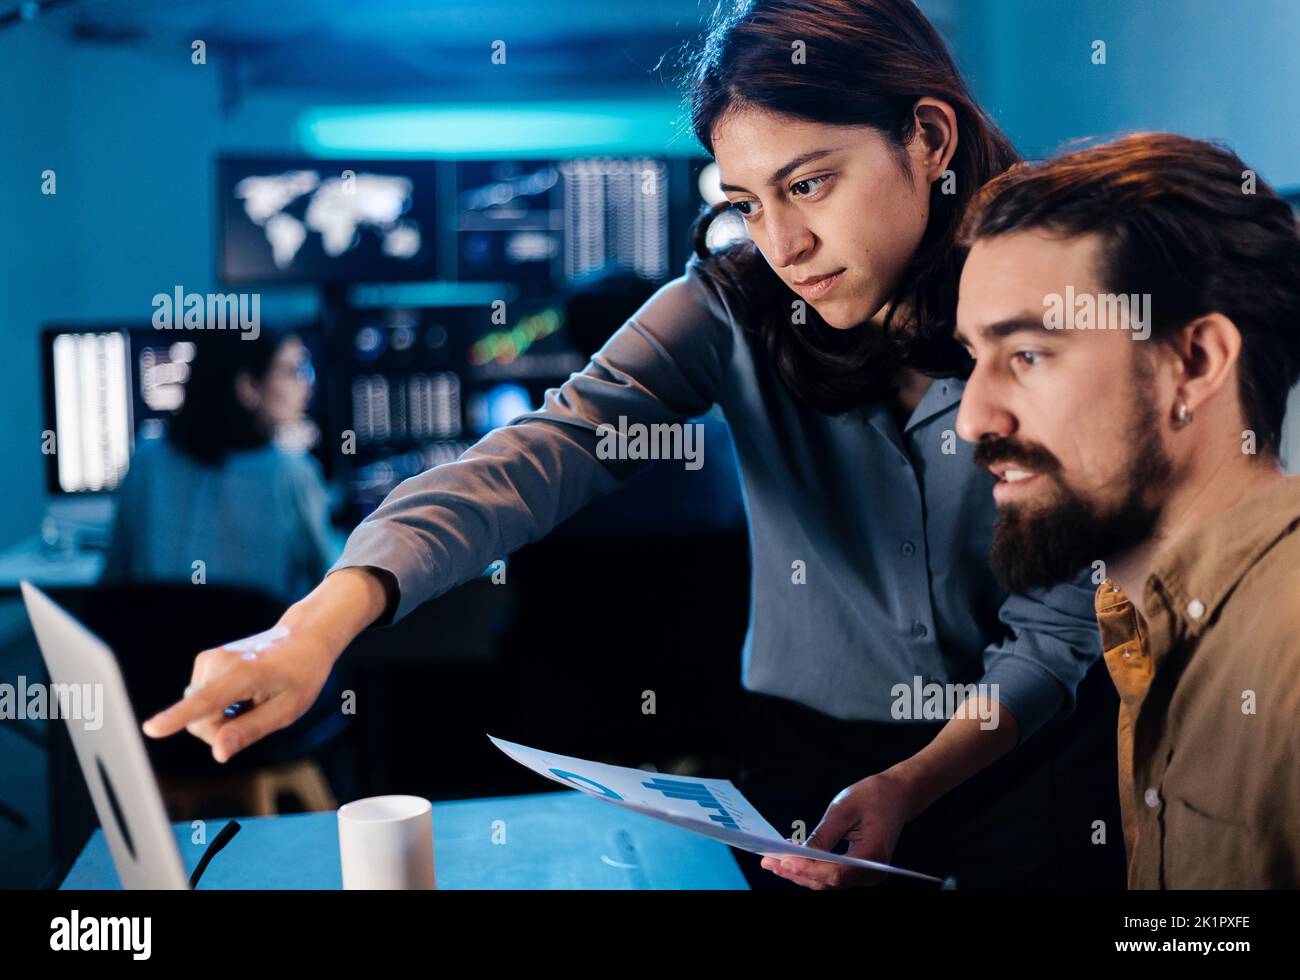 Stock trader team looking and analyzing stock data on laptop Stock Photo